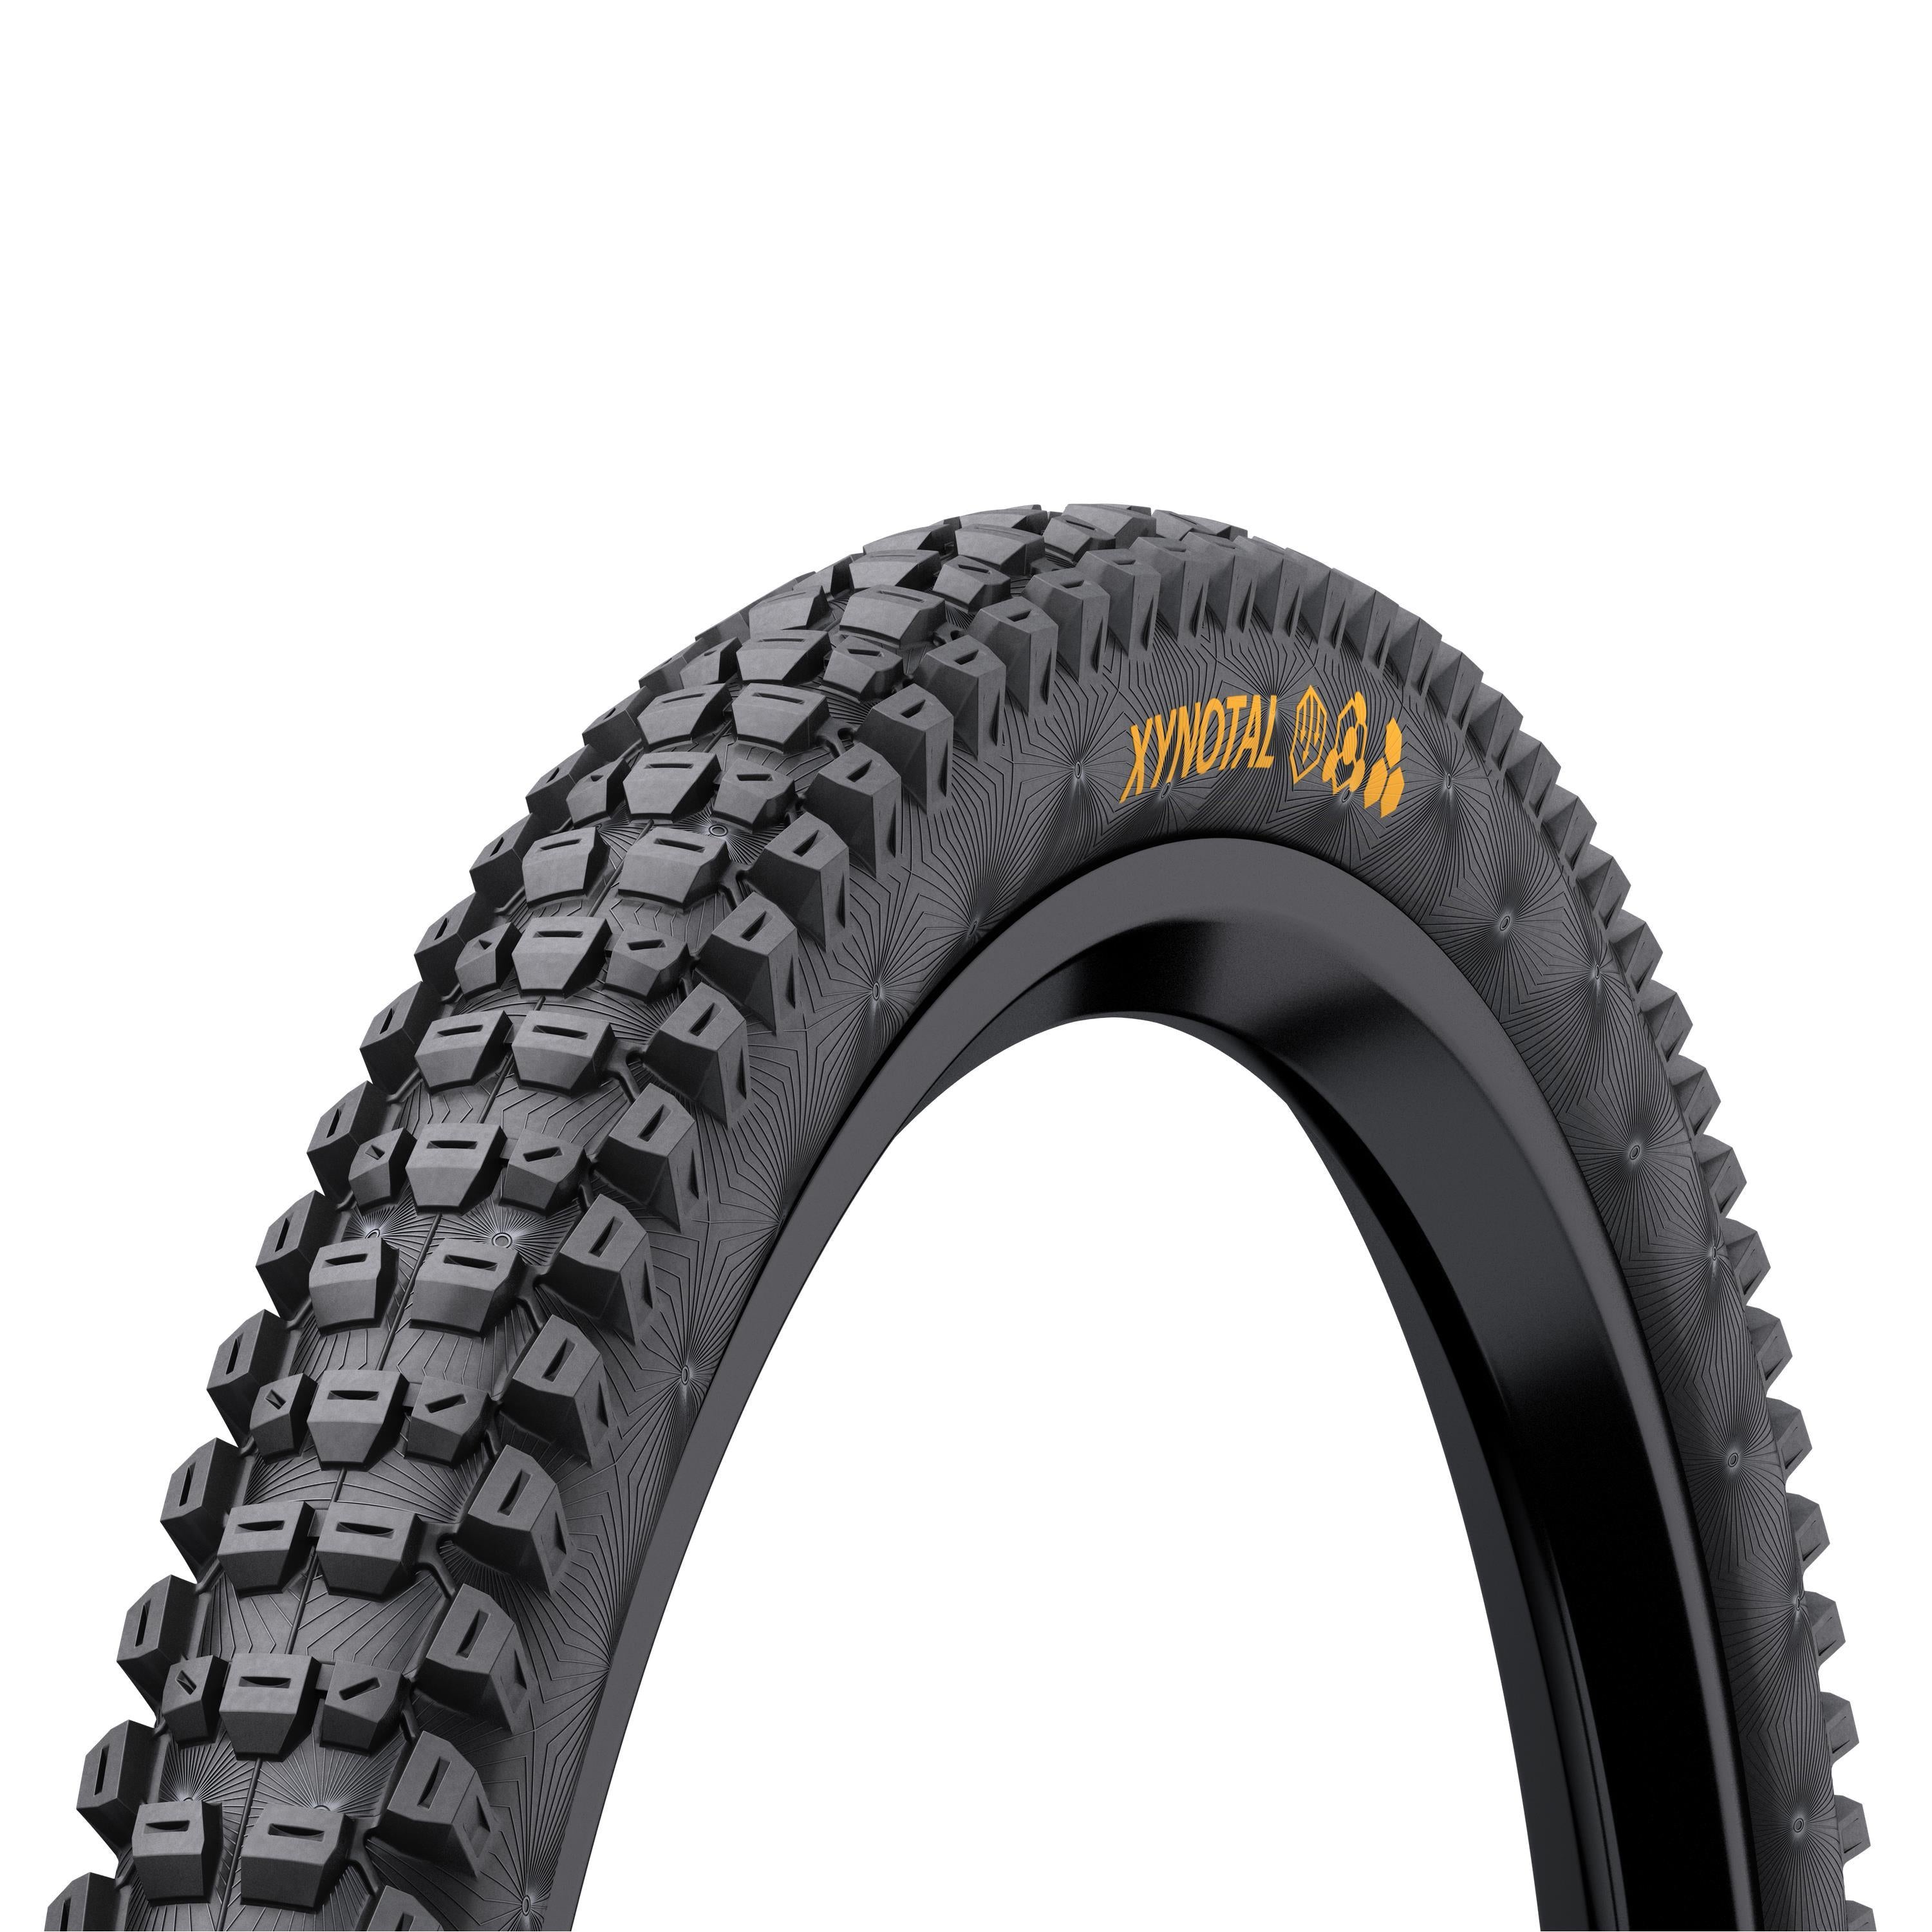 Continental Xynotal Tyre